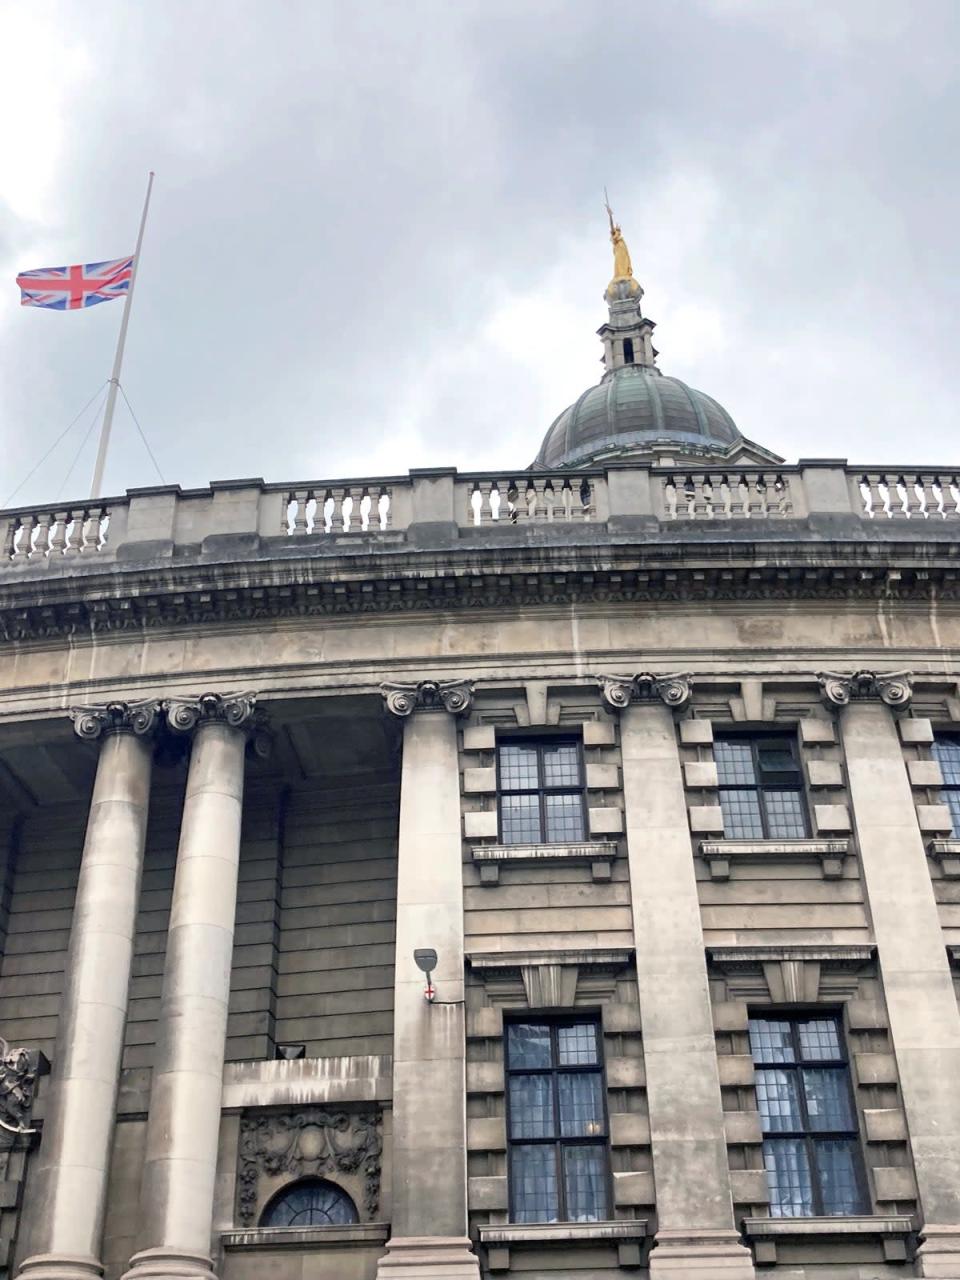 The Union flag flies at half mast at the Old Bailey in London (Emily Pennink/PA) (PA Wire)